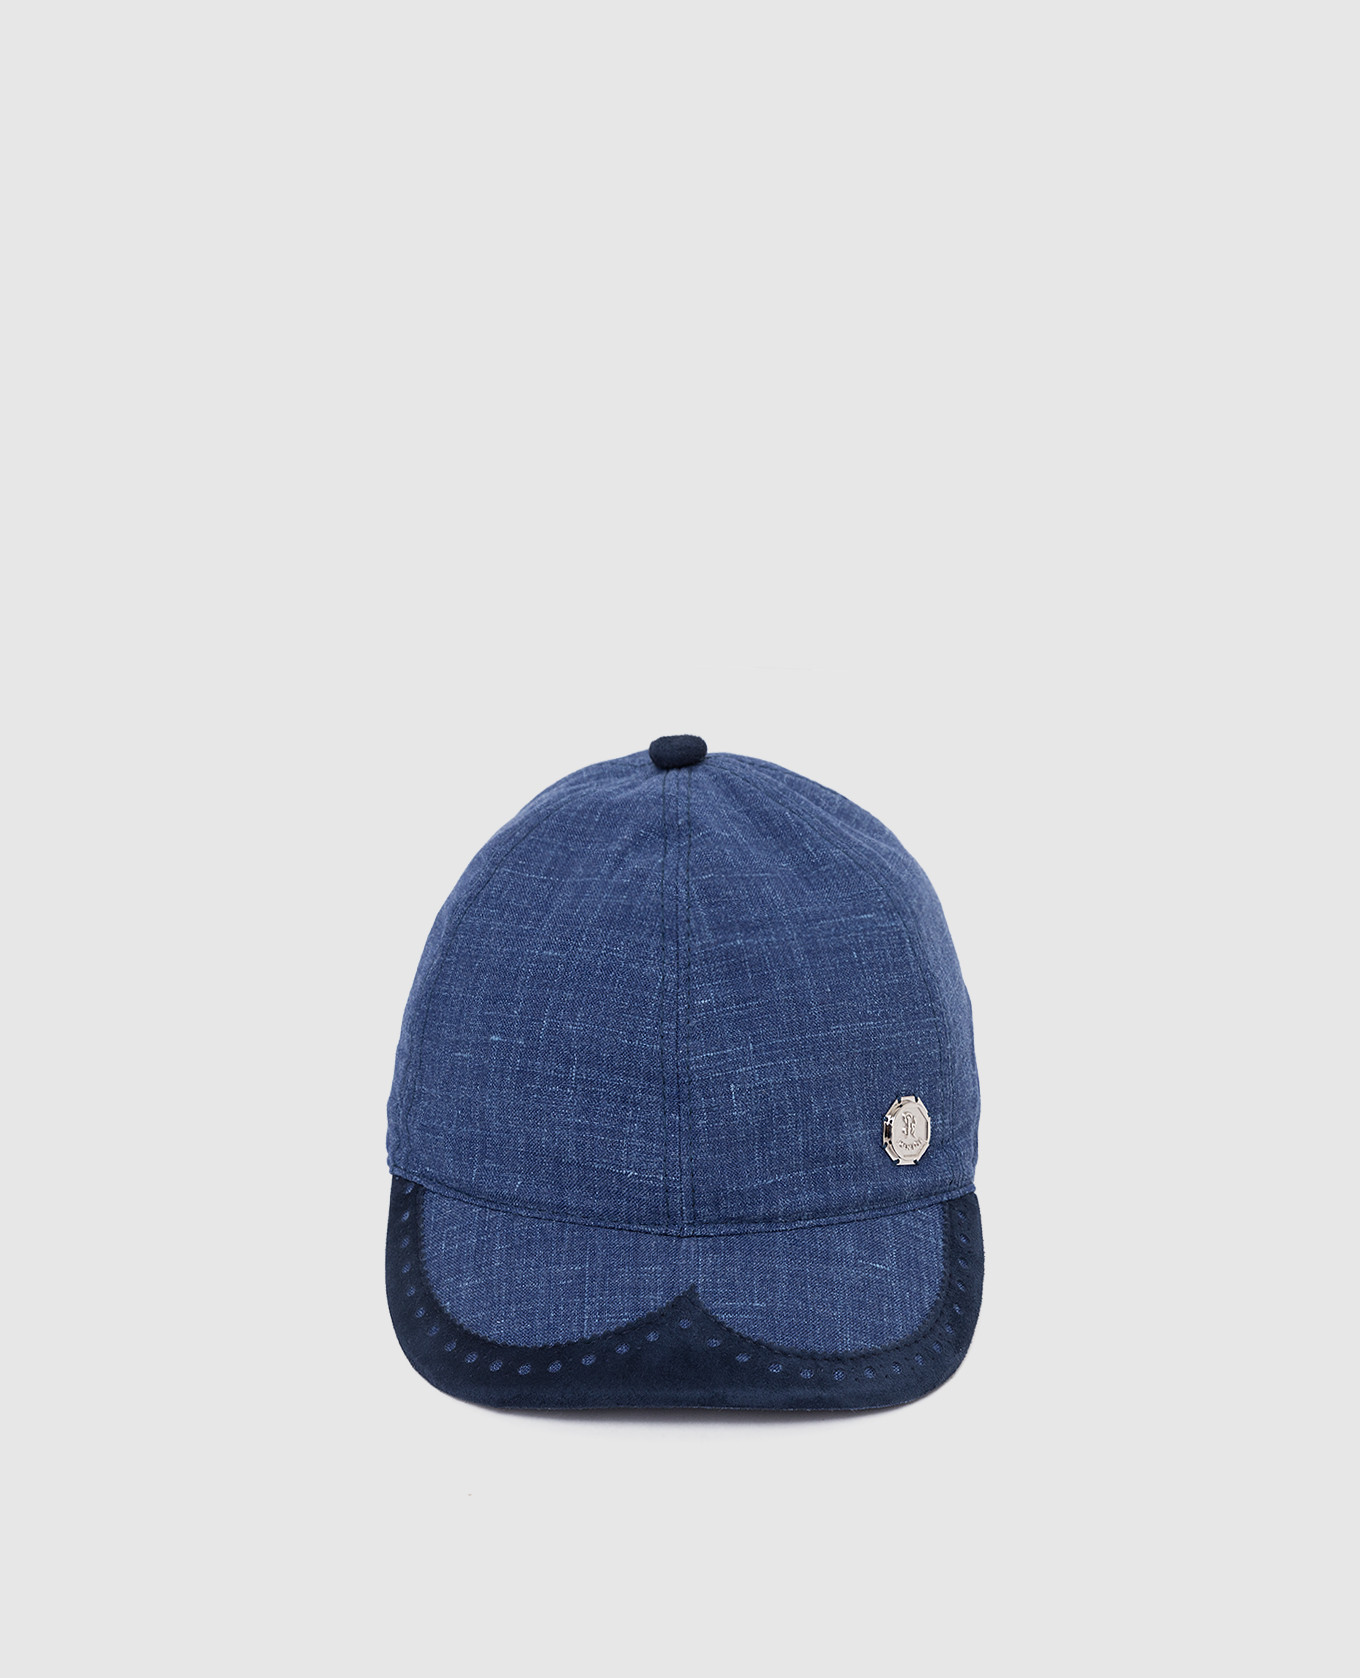 Children's blue cap in wool and silk with a pattern